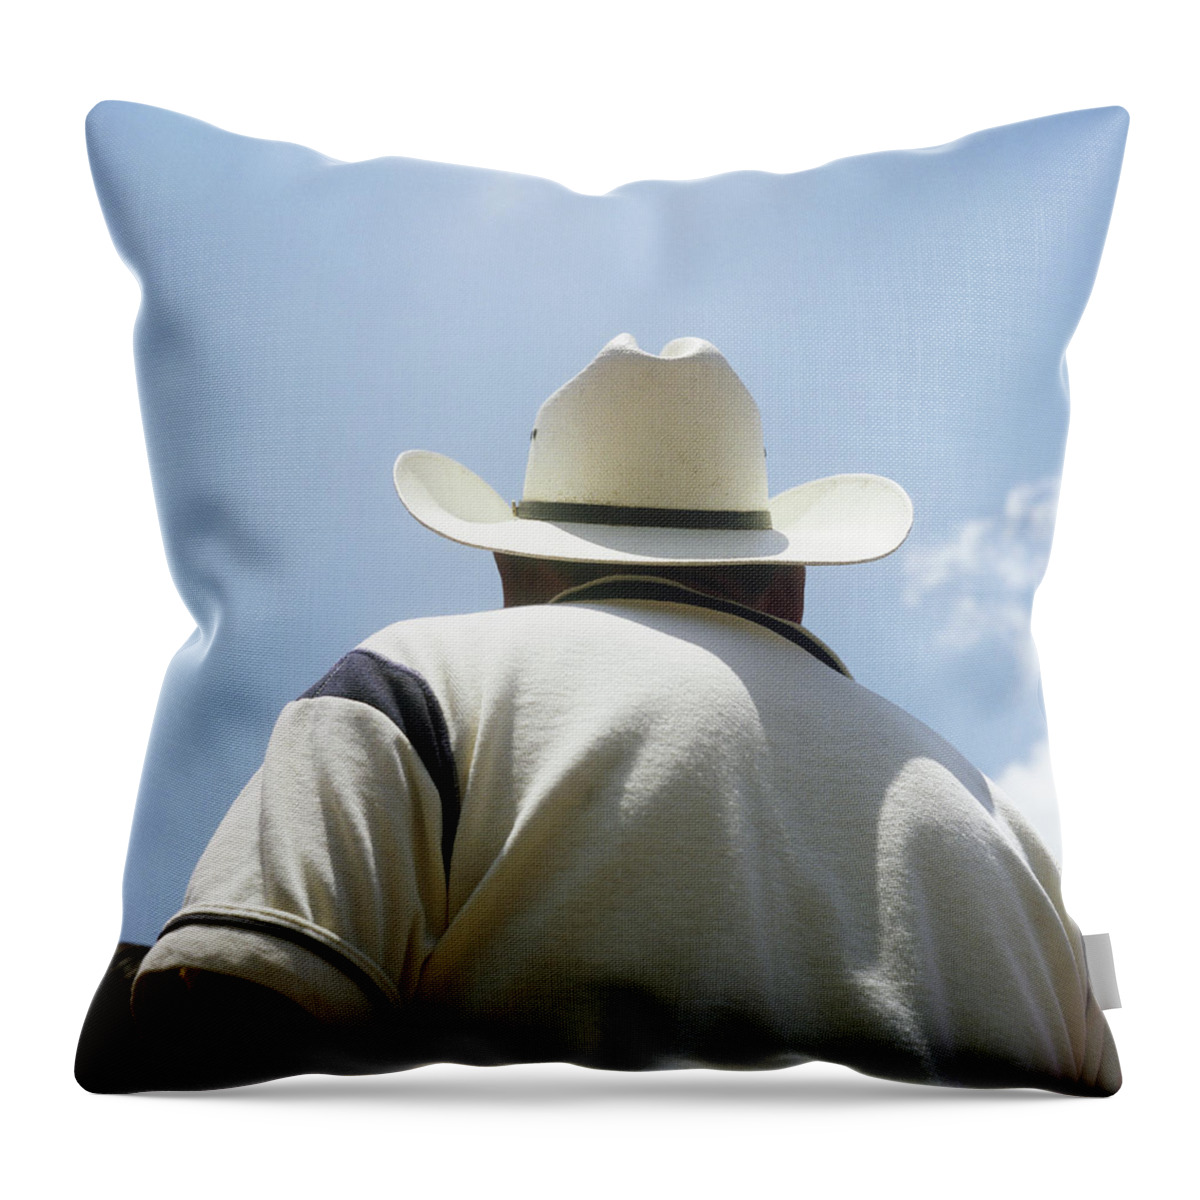 People Throw Pillow featuring the photograph Man In Cowboy Hat, Rear View by Russell Monk